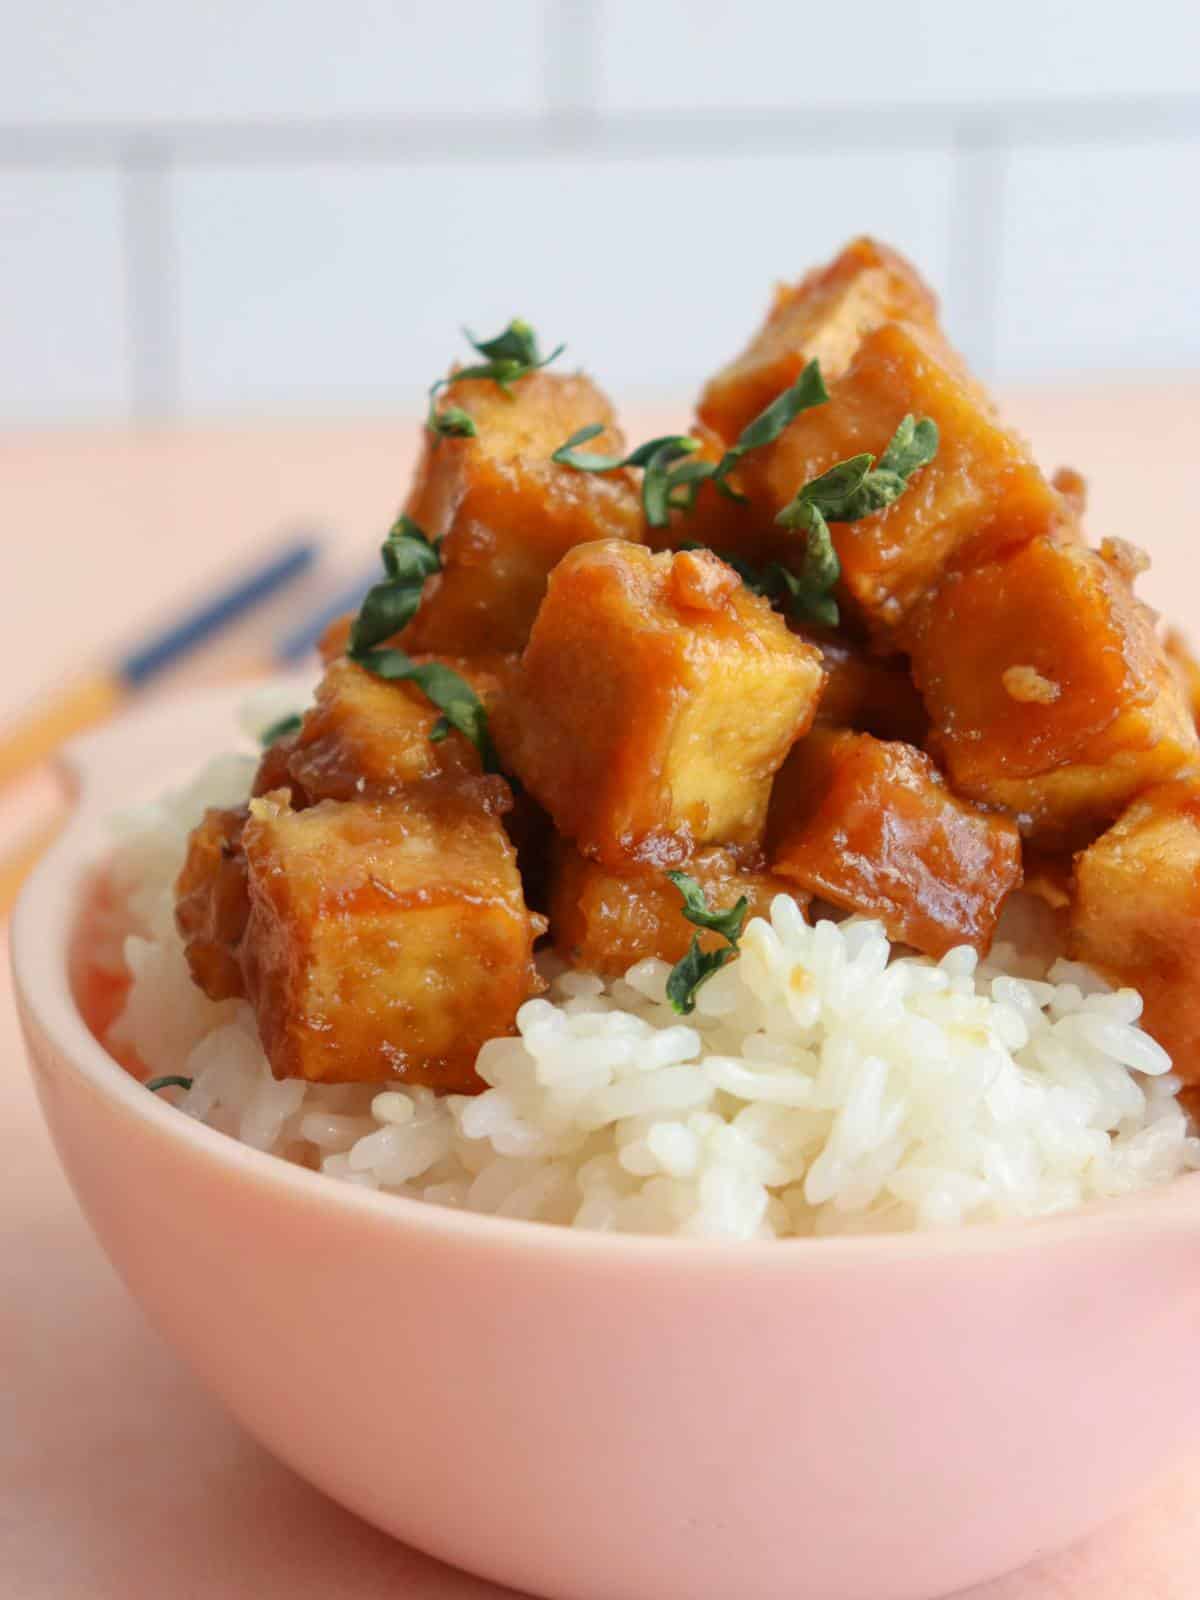 Sticky tofu with miso glaze in a bowl over rice.